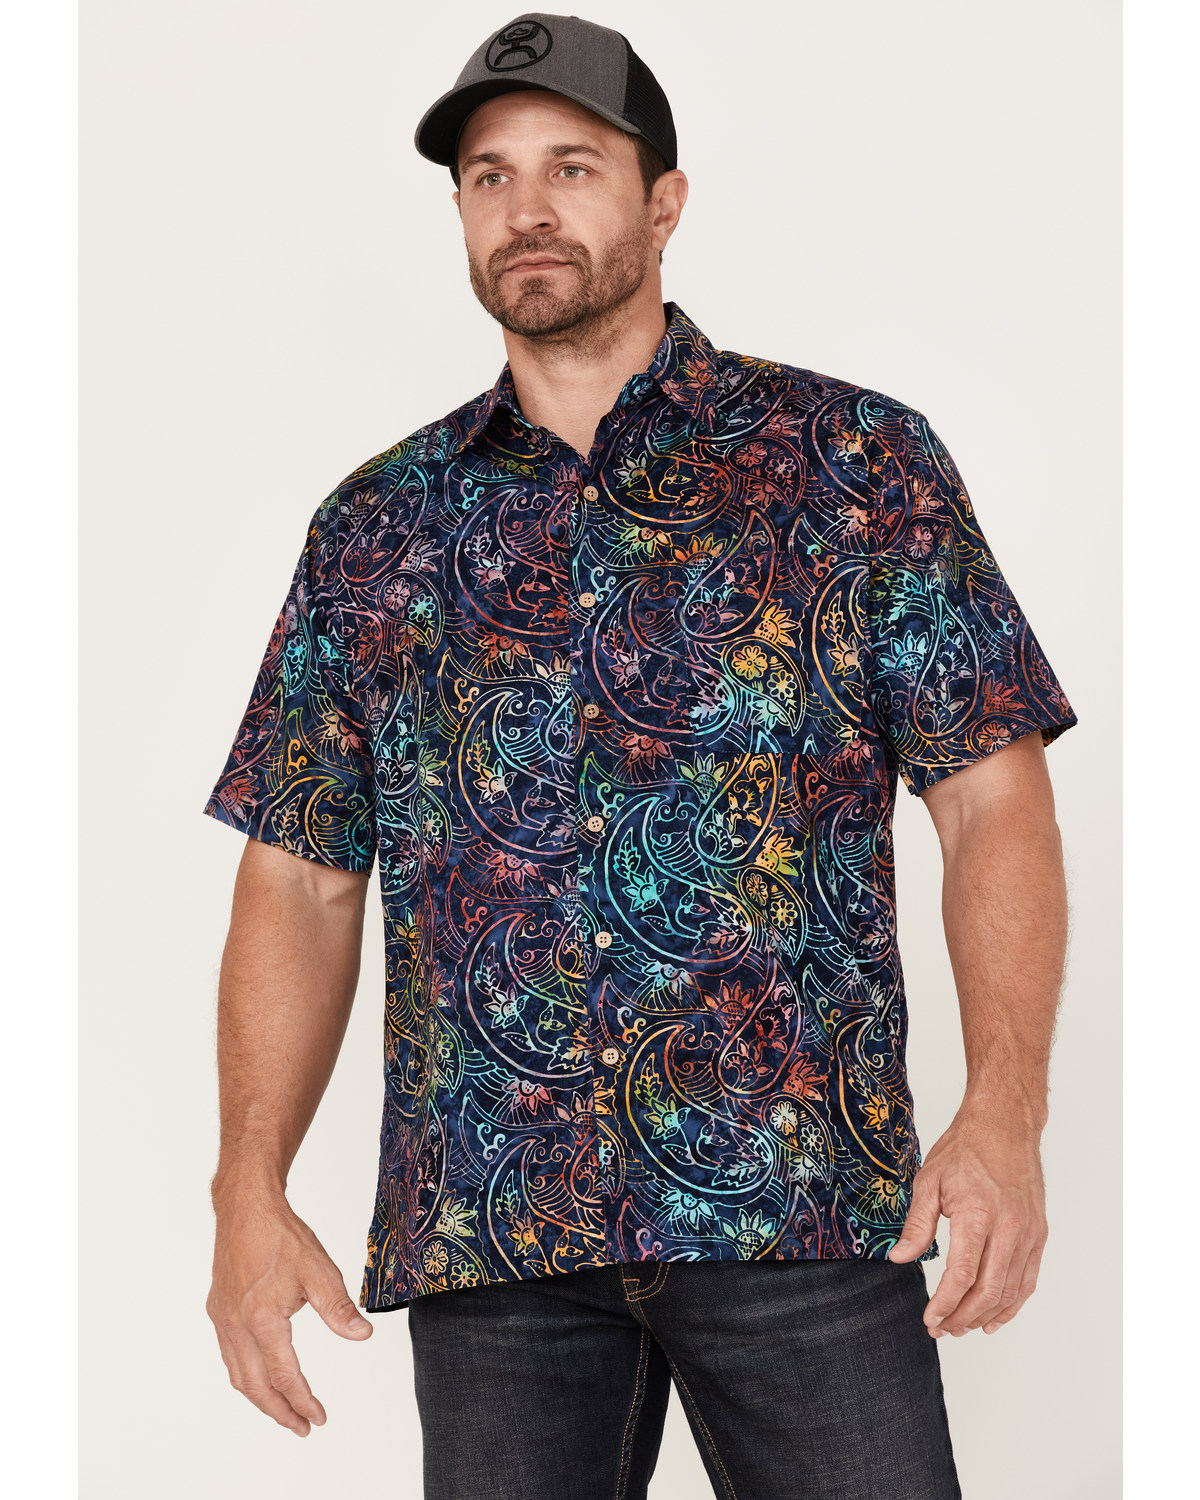 Scully Men's Paisley Floral Print Short Sleeve Button Down Western Shirt